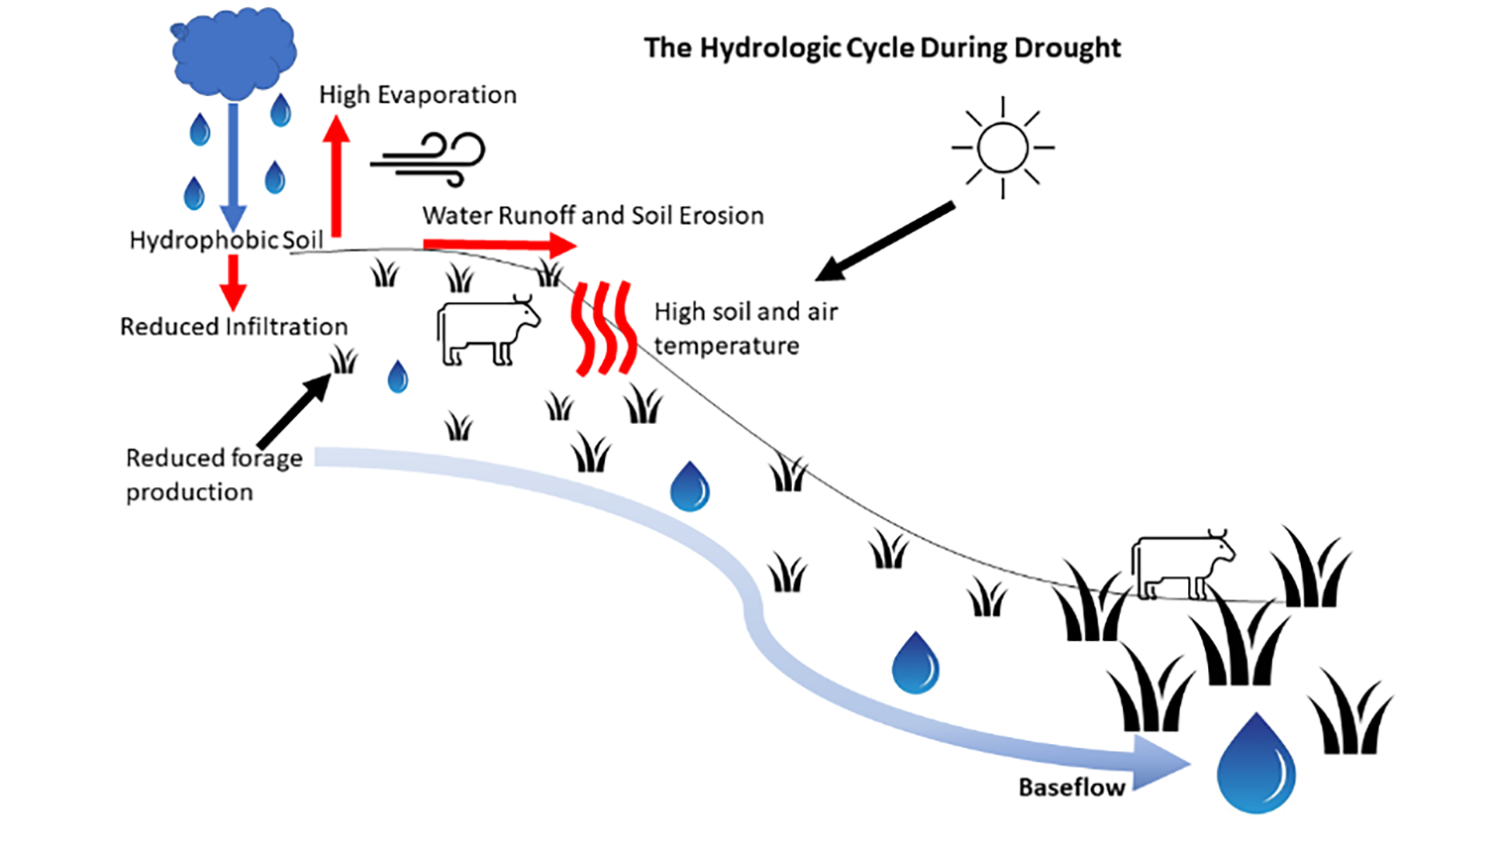 Diagram of the hydrologic cycle during drought illustrating the interaction of temperature, moisture, vegetation and erosion. For help understanding this diagram, call SDSU Extension at 605-688-6729.